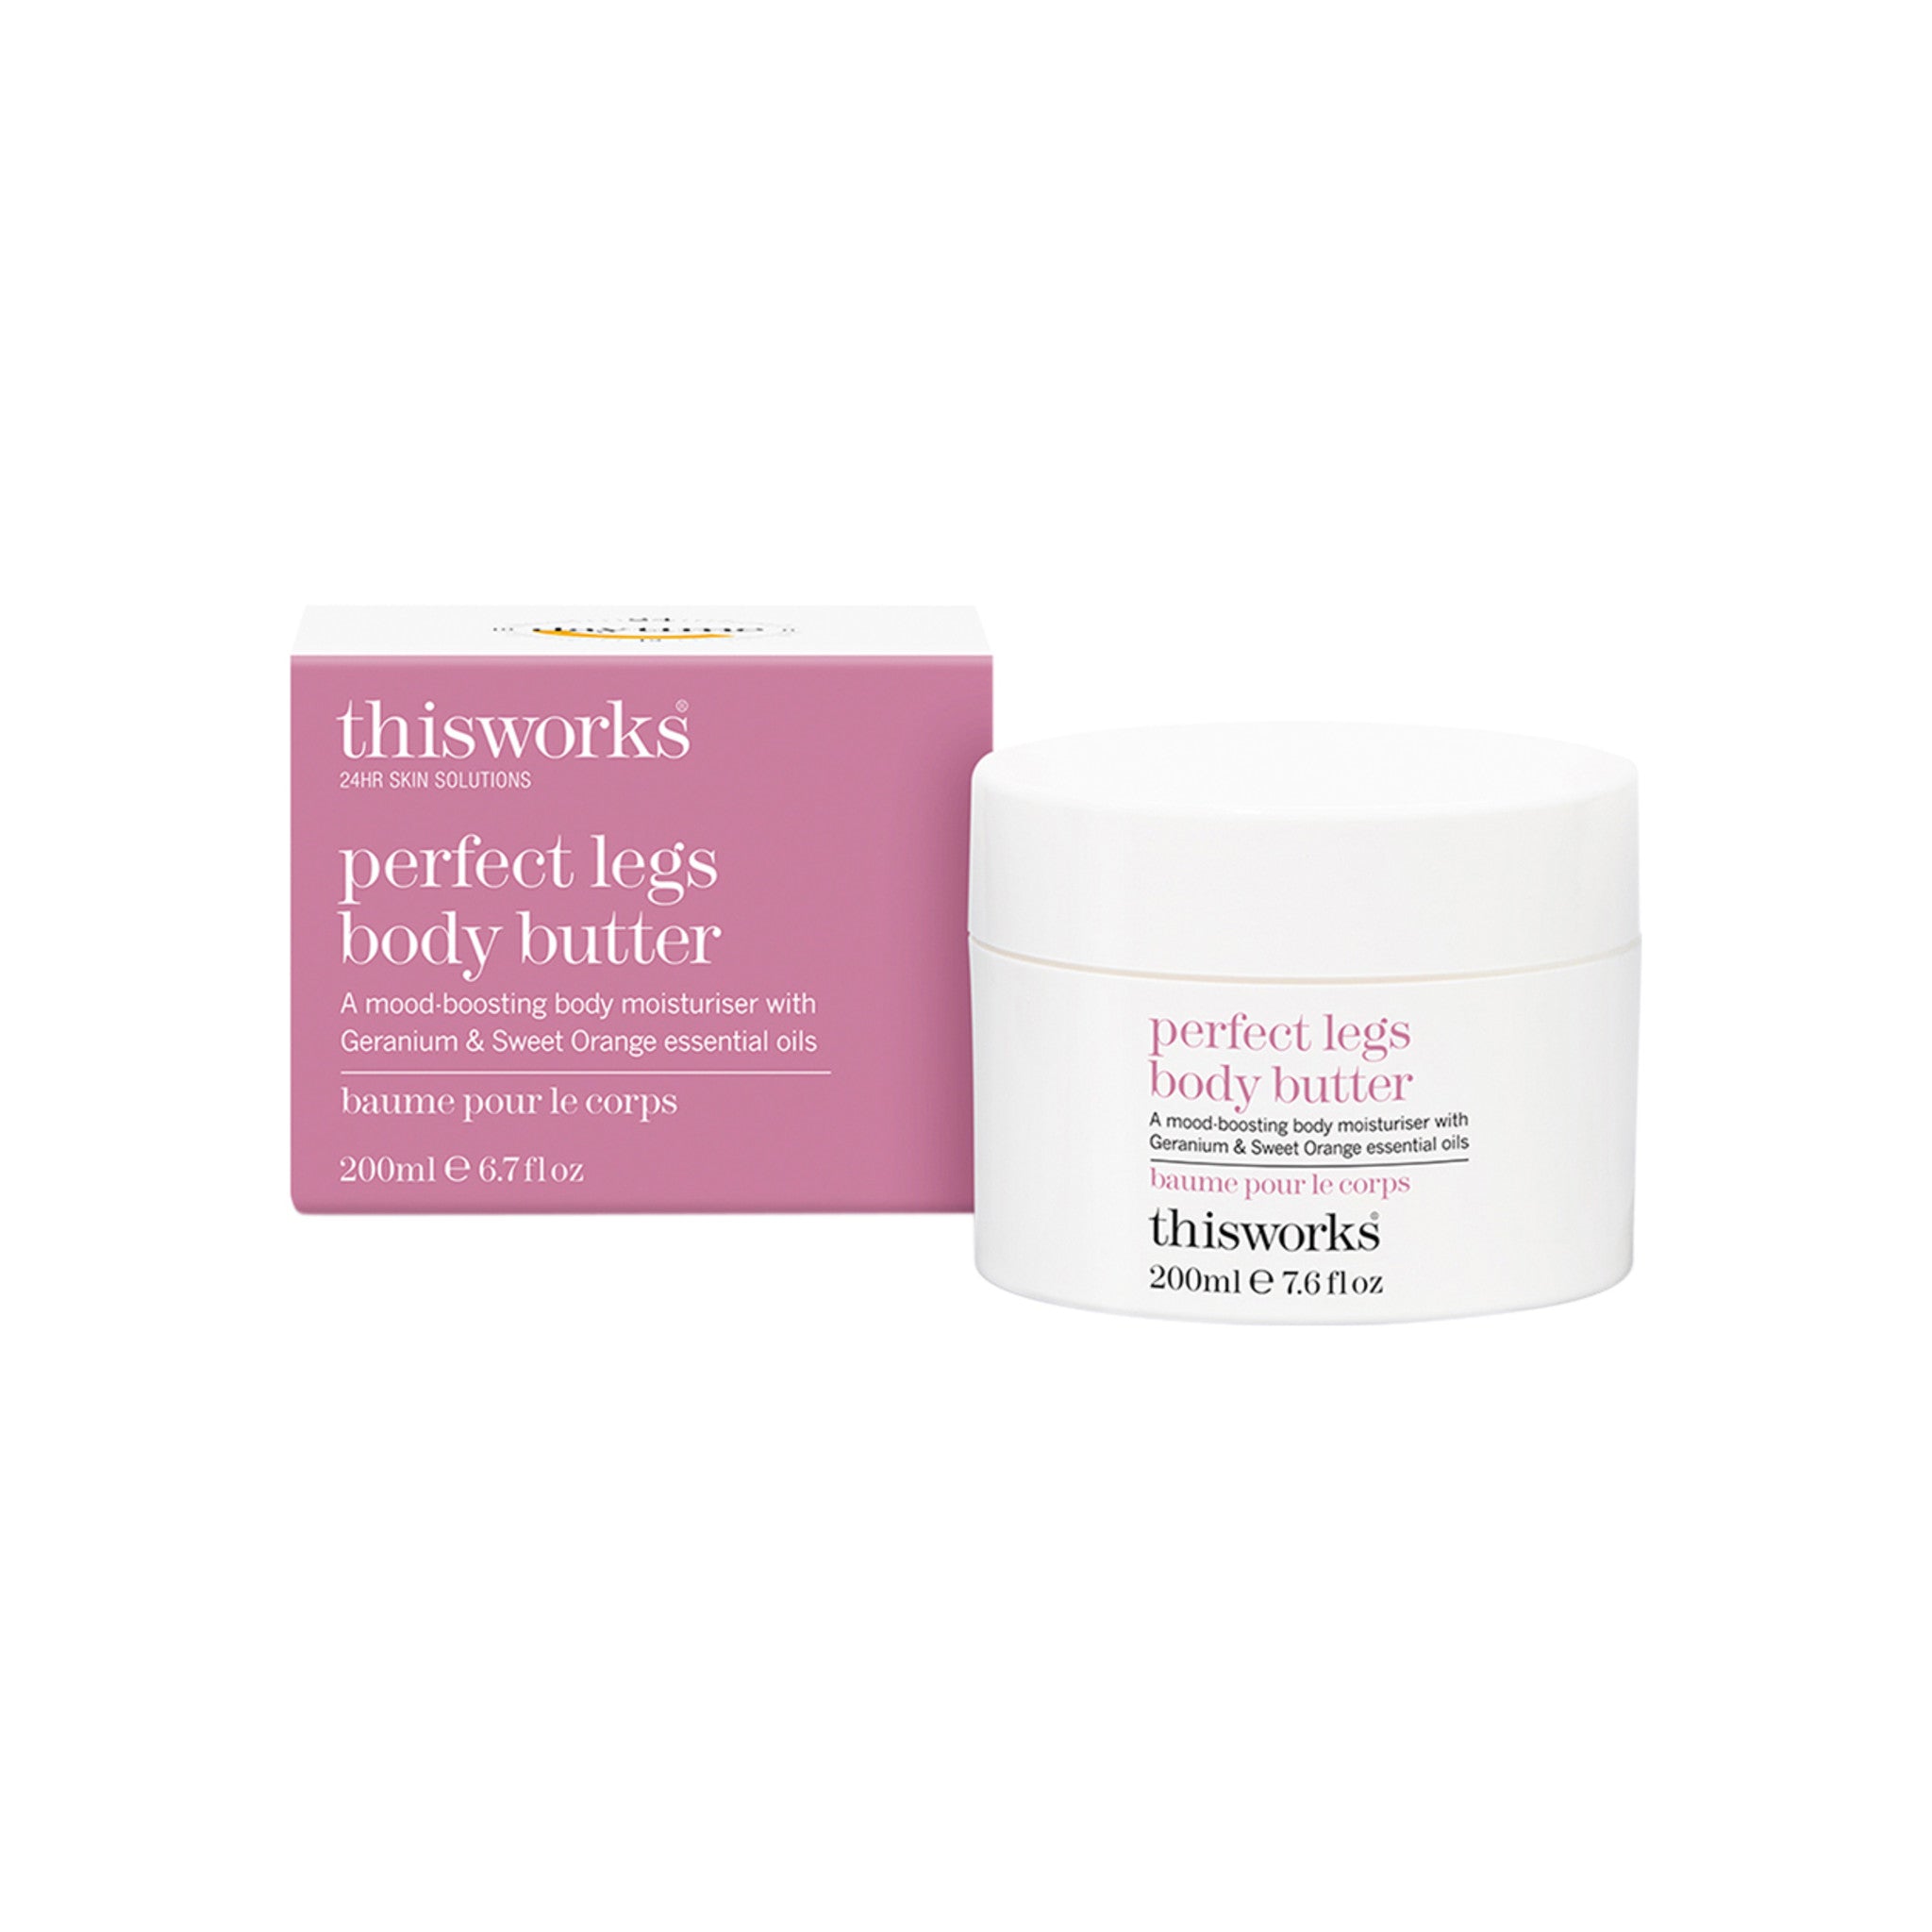 This Works Perfect Legs Body Butter main image.